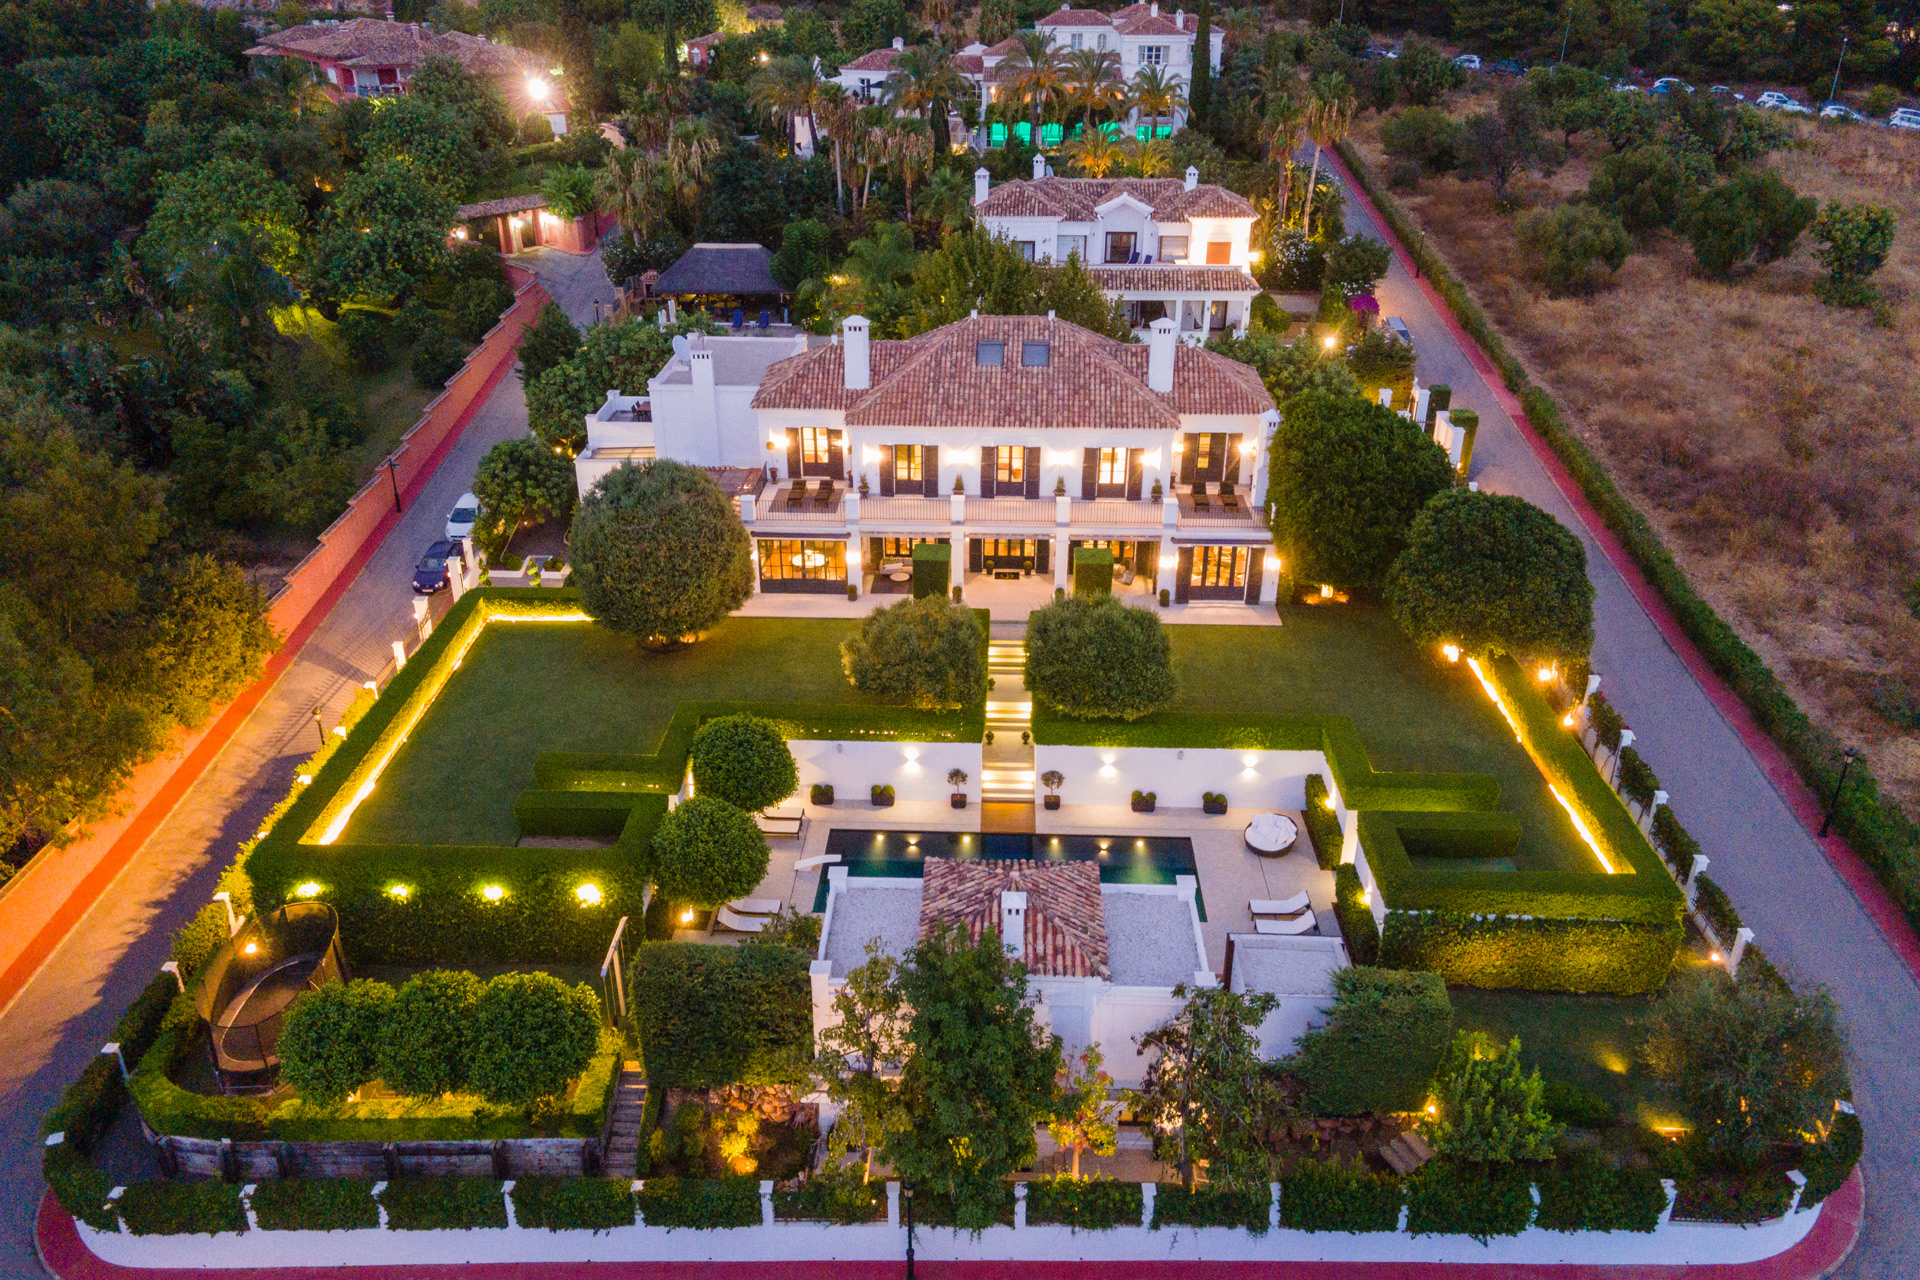 Aerial view of Spanish villa with landscaped gardens, outhouses and a pool.